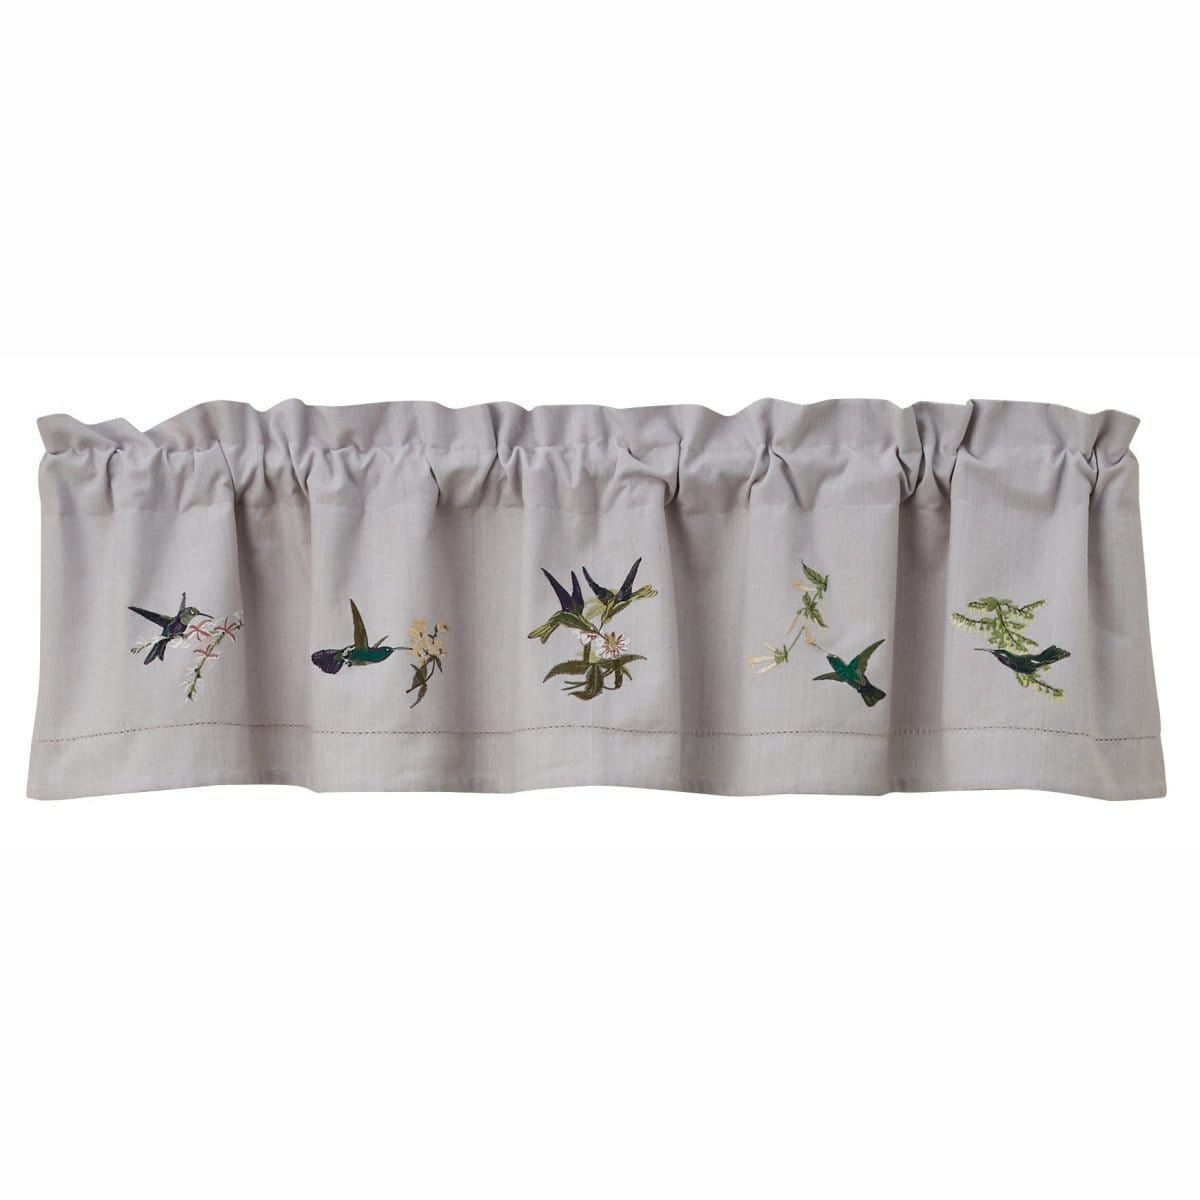 Embroidered hummingbird Valance 14" High Lined-Park Designs-The Village Merchant